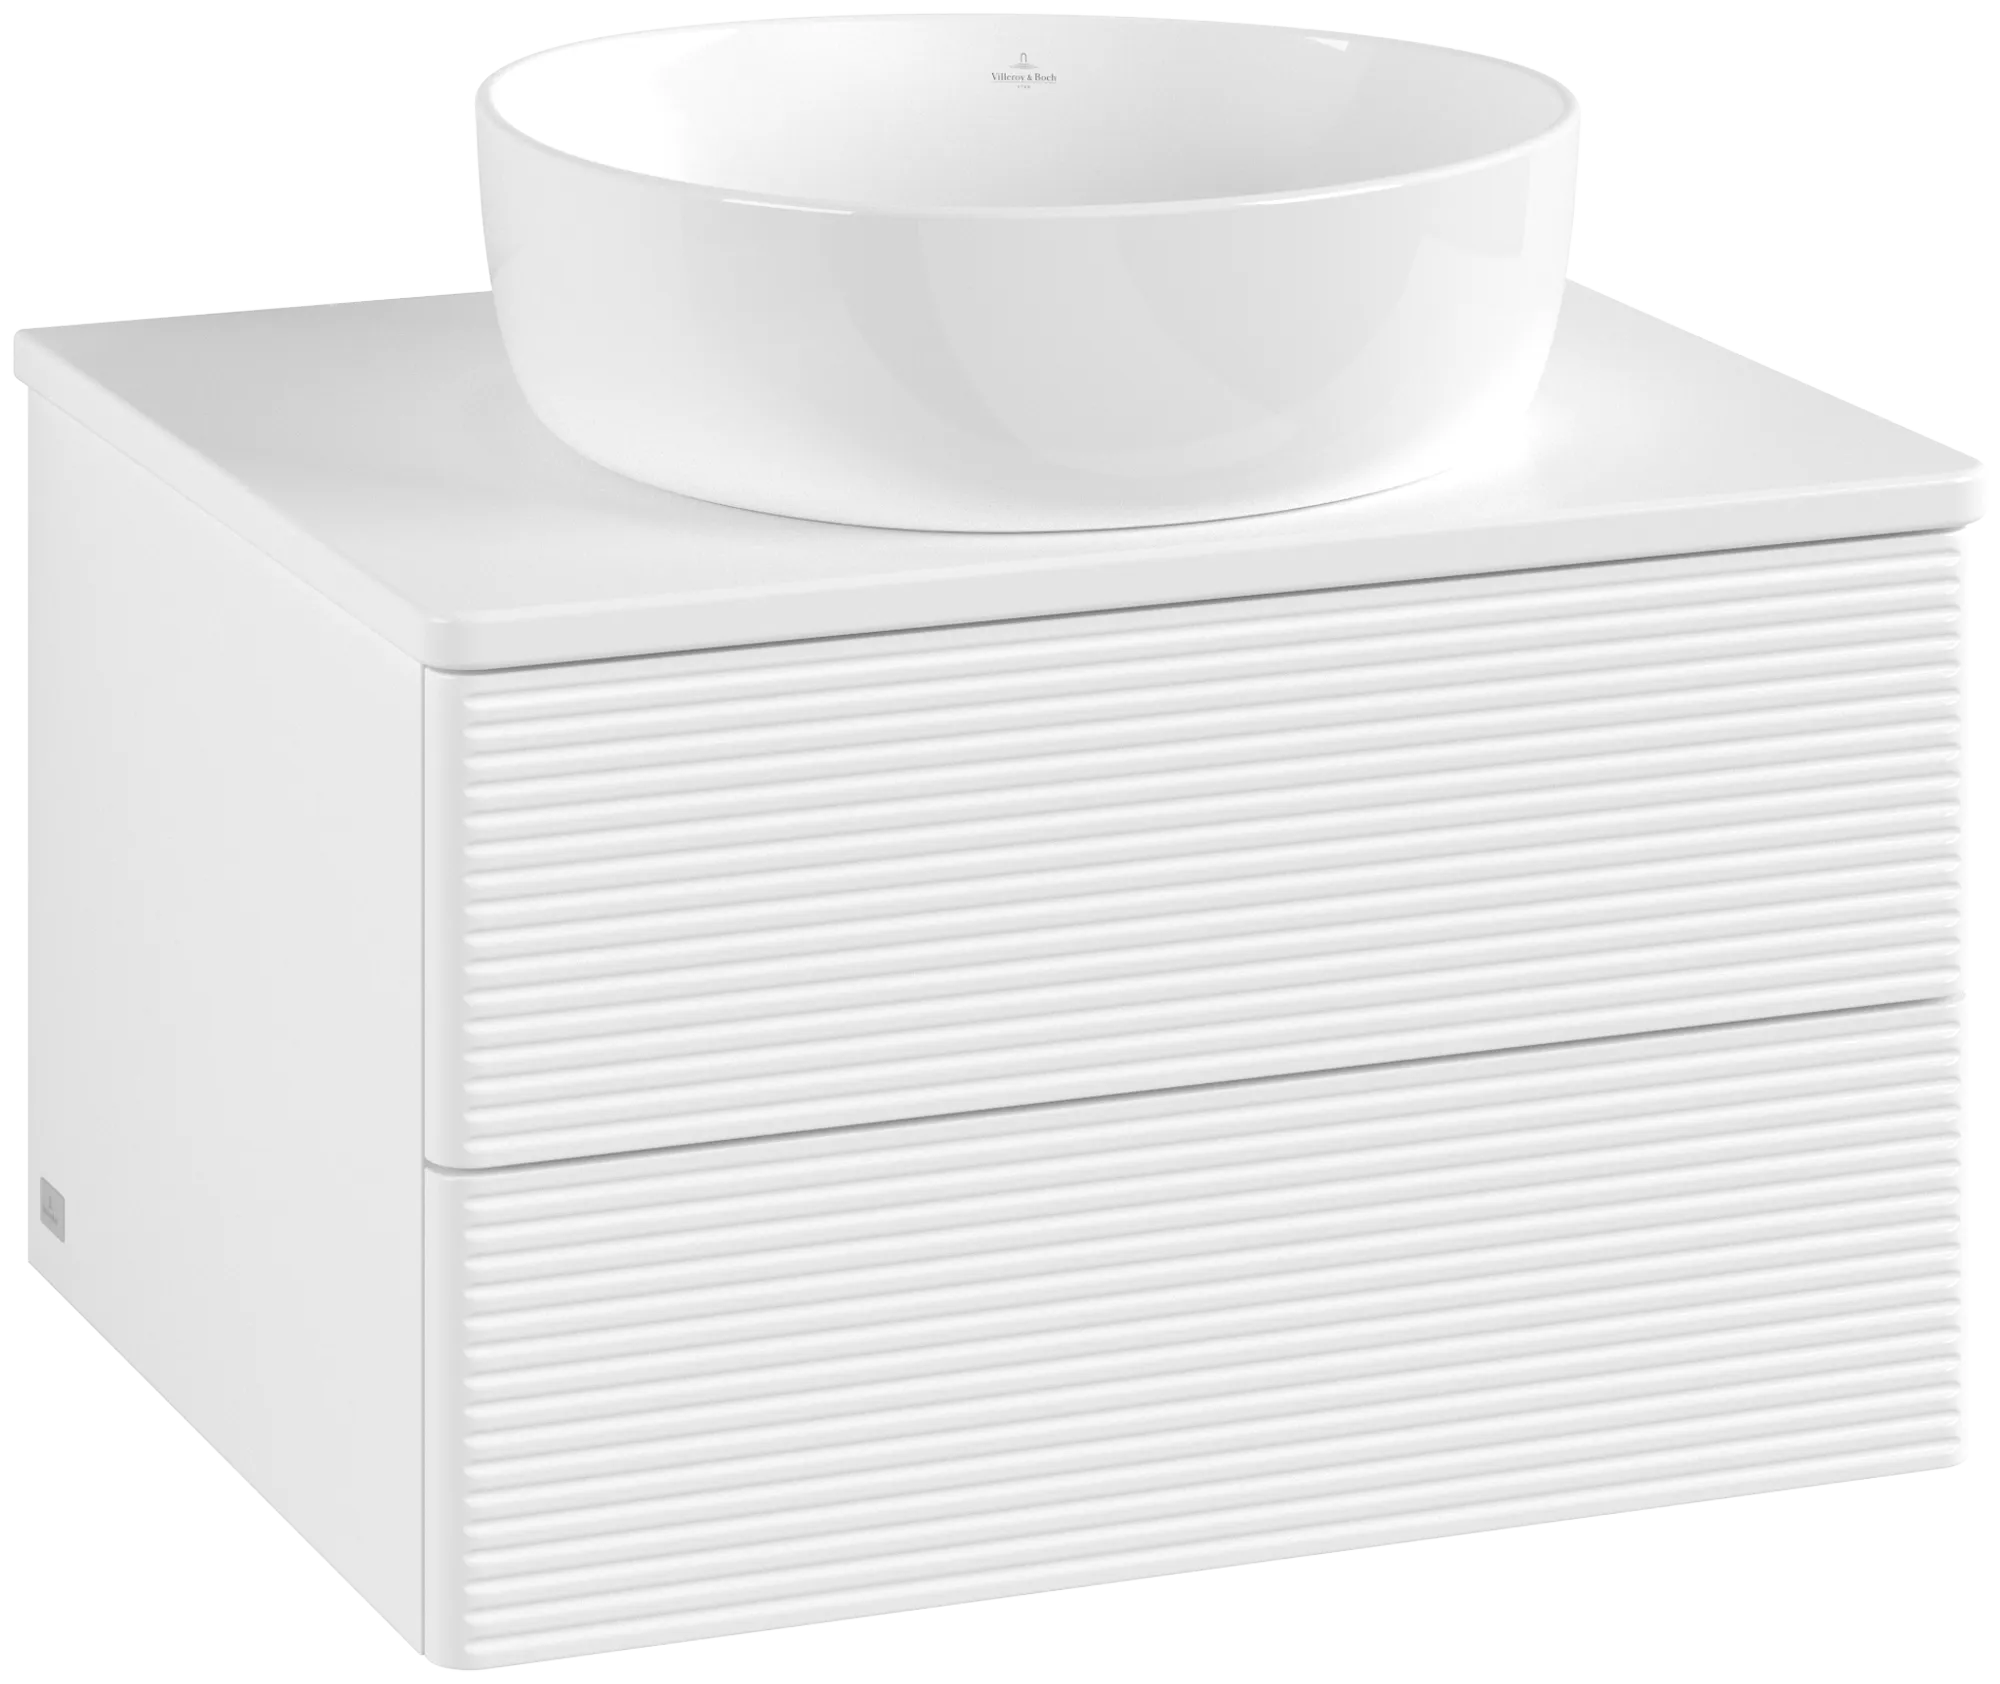 Picture of VILLEROY BOCH Antao Vanity unit, with lighting, 2 pull-out compartments, 600 x 360 x 500 mm, Front with grain texture, White Matt Lacquer / White Matt Lacquer #L18150MT